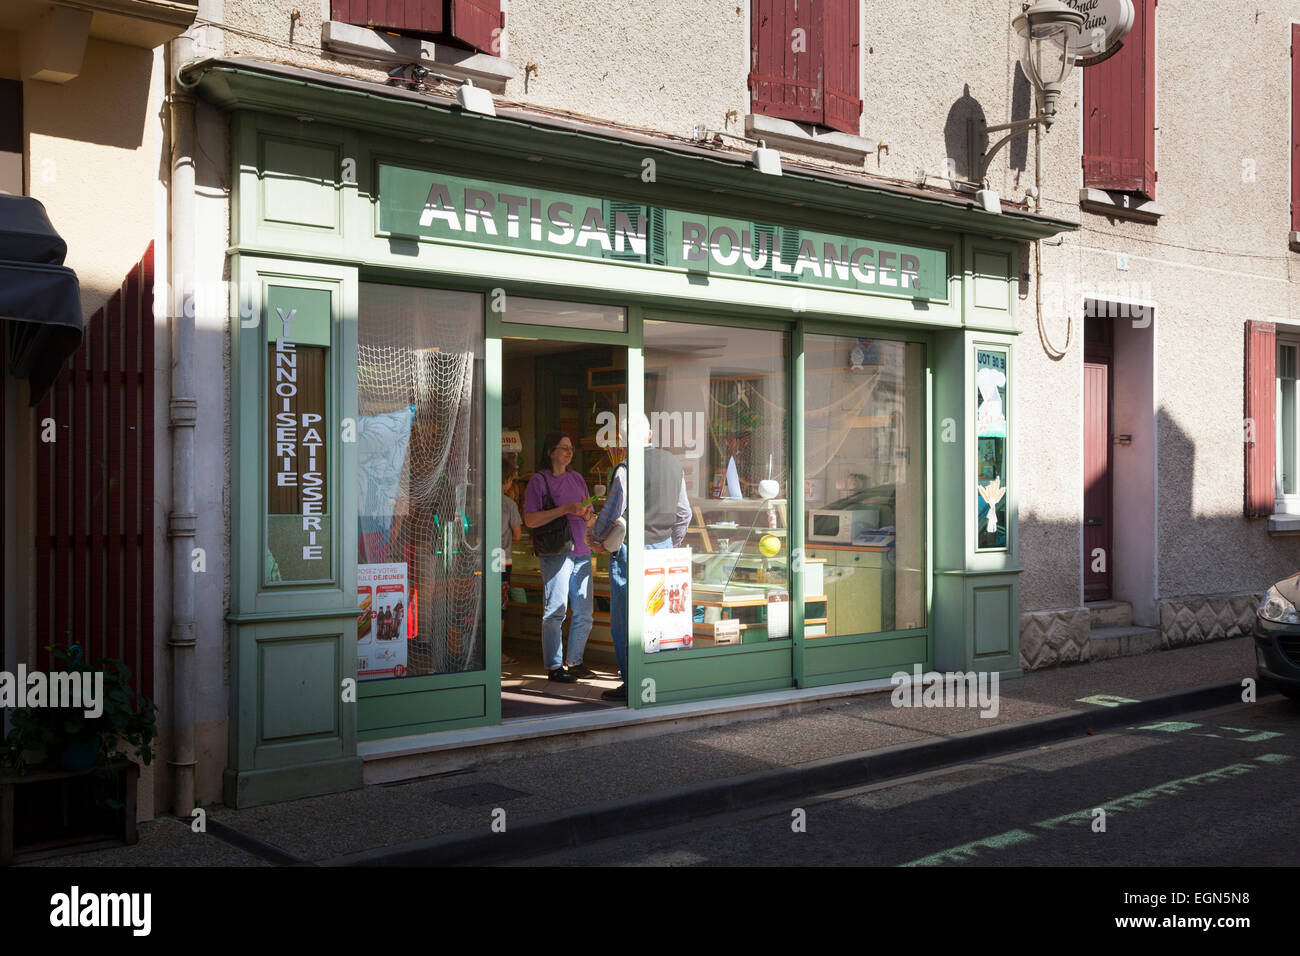 Exterior of French Artisan Boulanger and patesserie shop Stock Photo